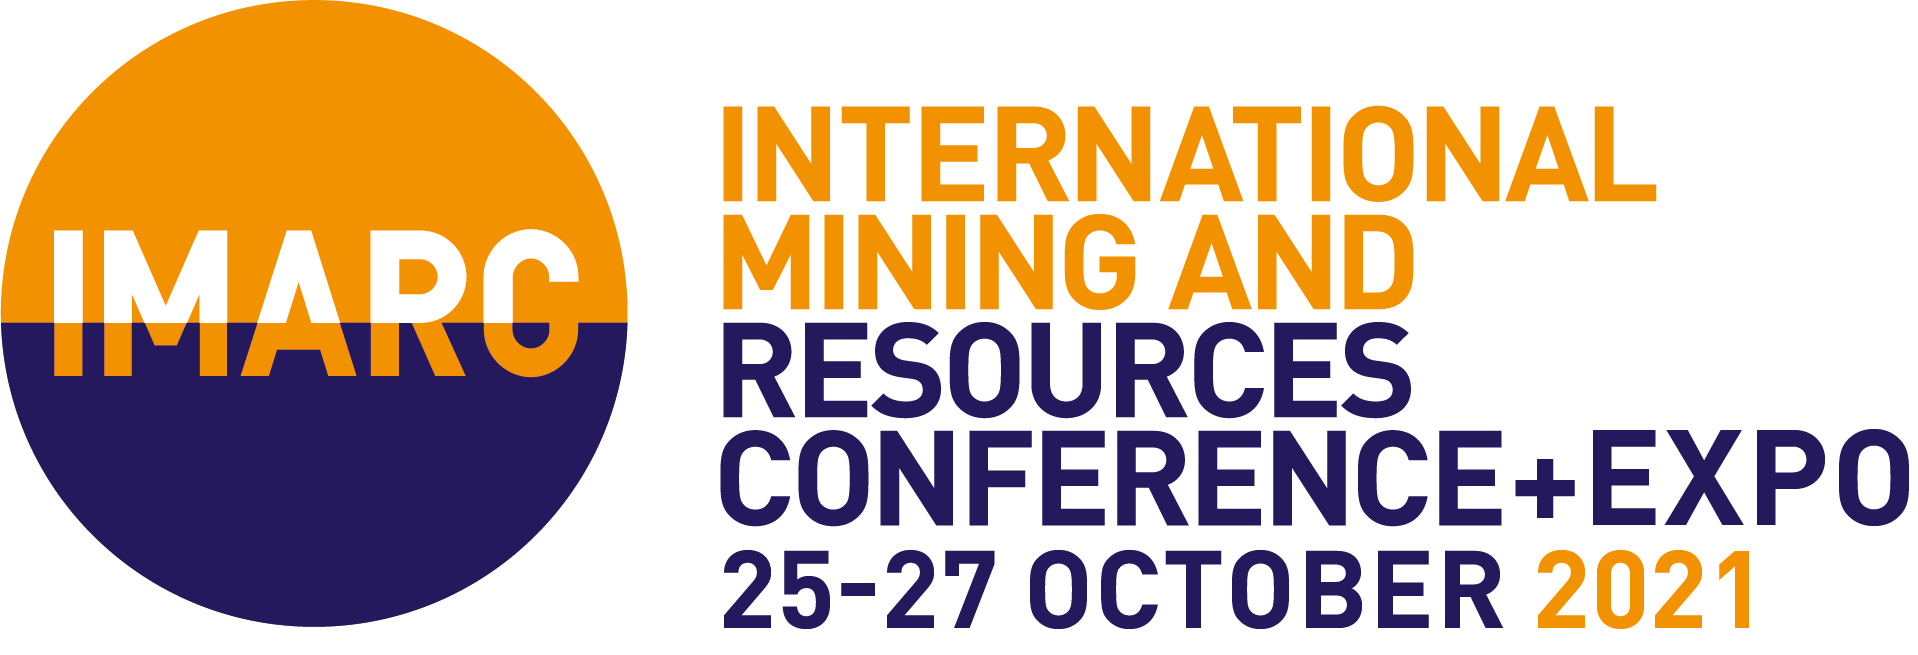 The International Mining and Resources Conference (IMARC